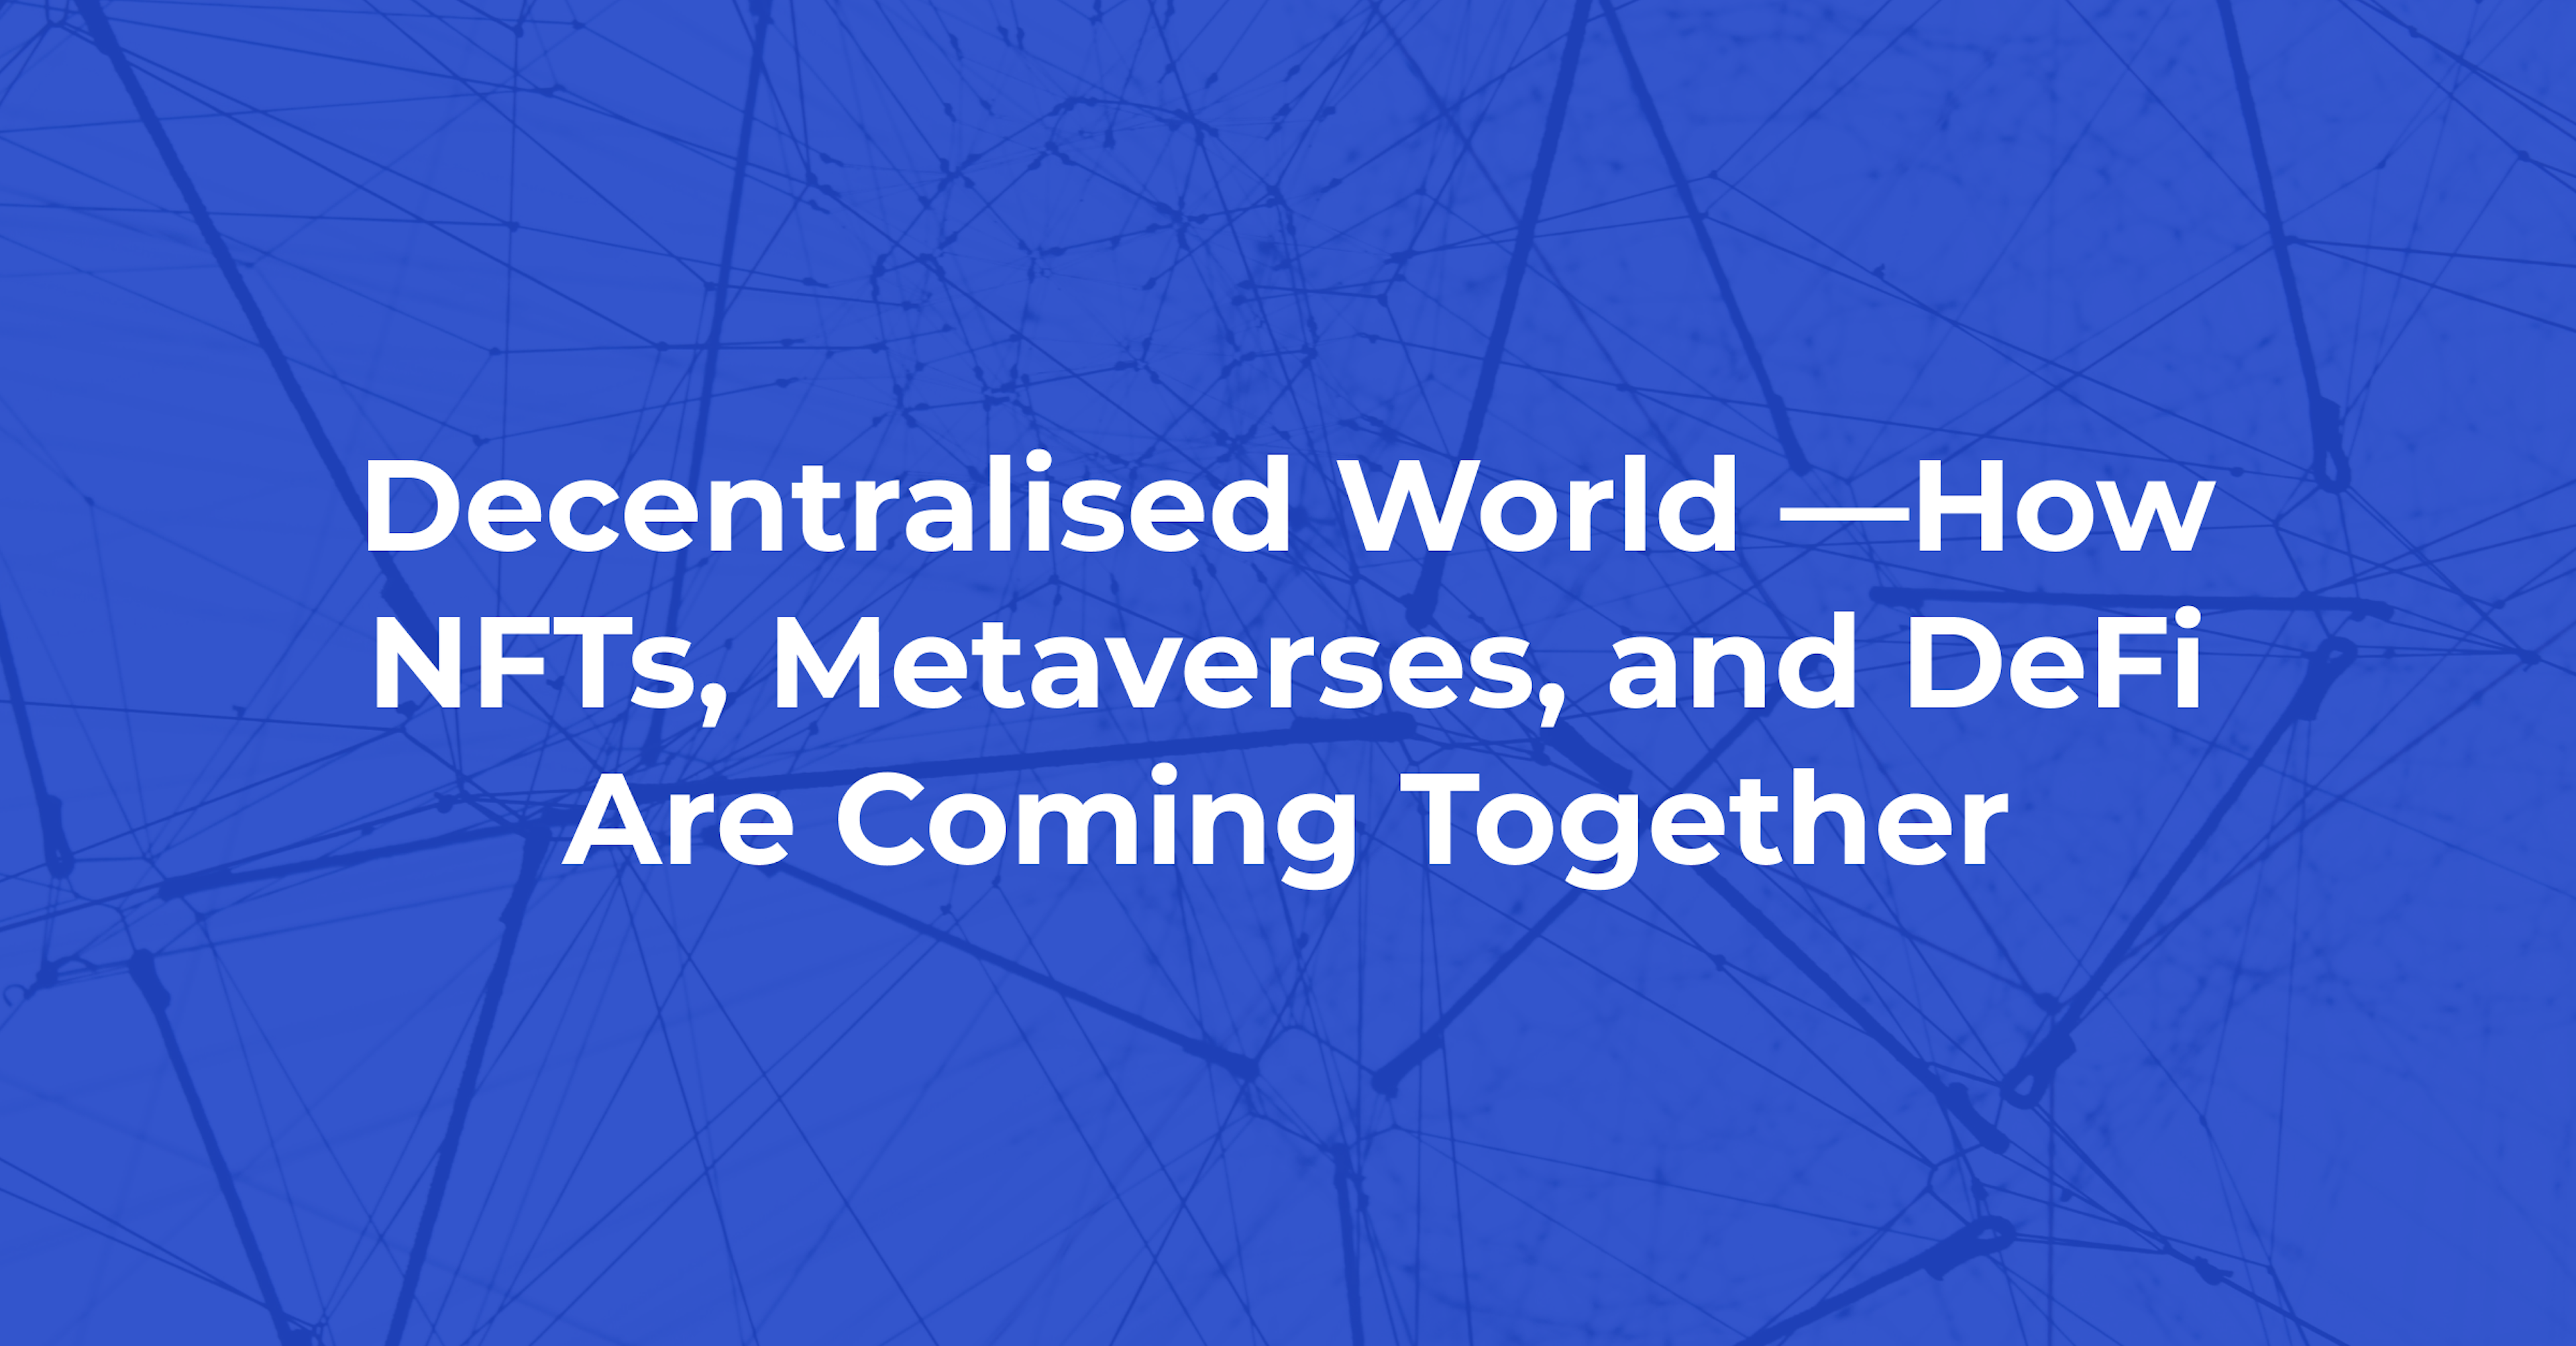 Decentralised World —How NFTs, Metaverses, and DeFi Are Coming Together